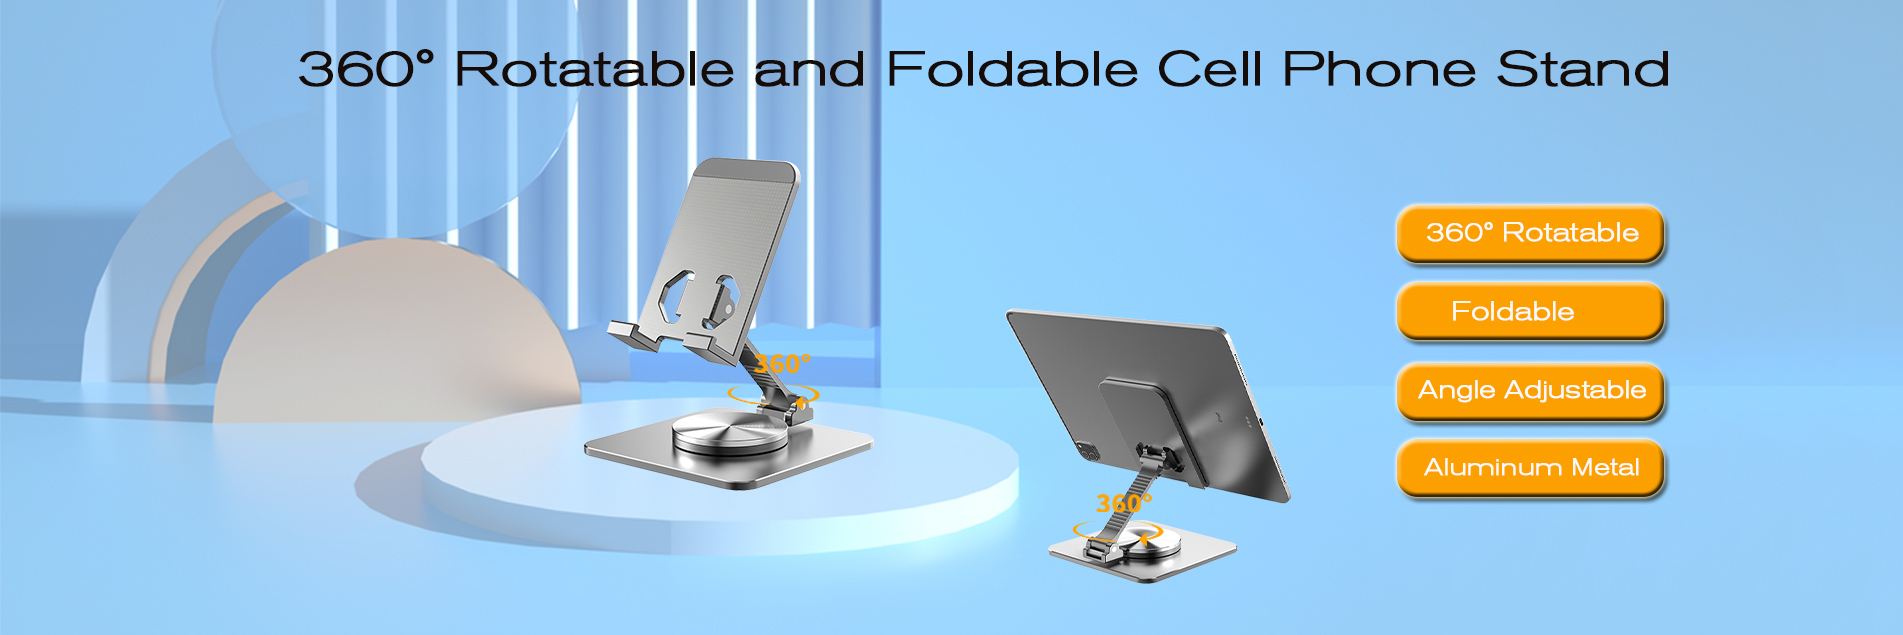 360° Rotatable and Foldable Cell Phone Stand